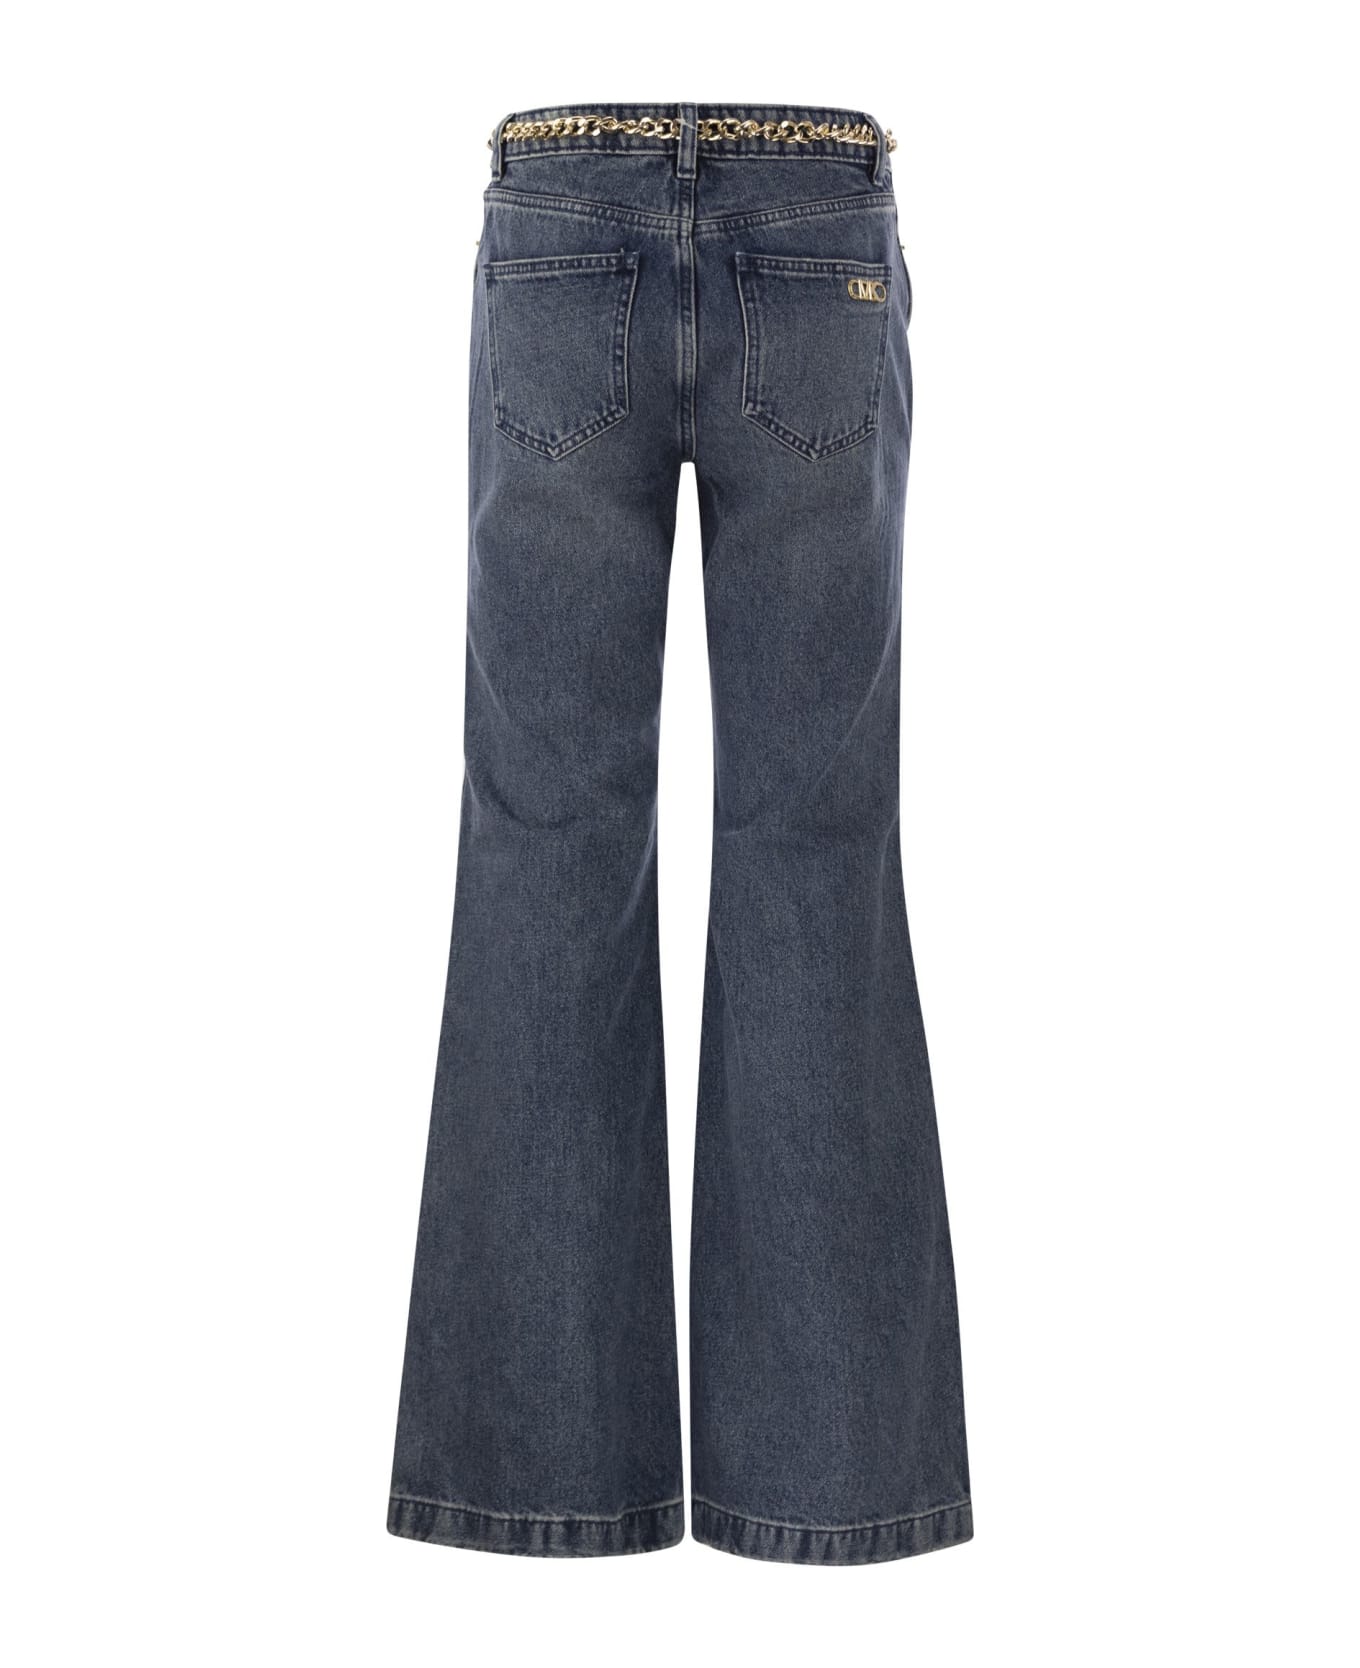 Michael Kors Flared Jeans With Chain Belt - Blue デニム